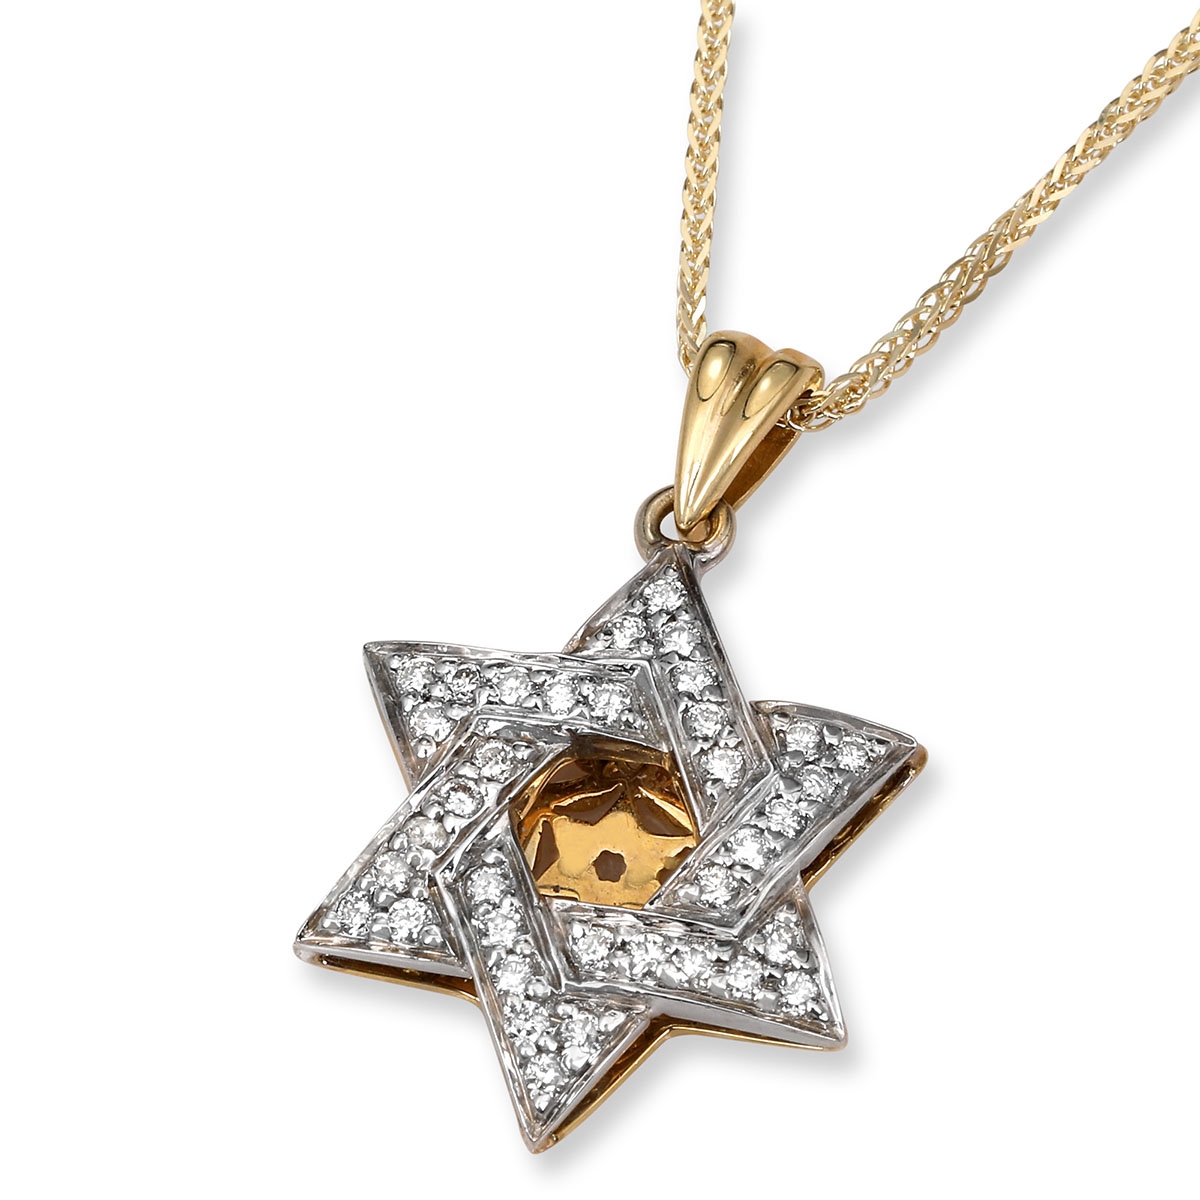 Anbinder Jewelry Diamond-Accented Two-Toned 14K Gold Star of David Pendant - 1